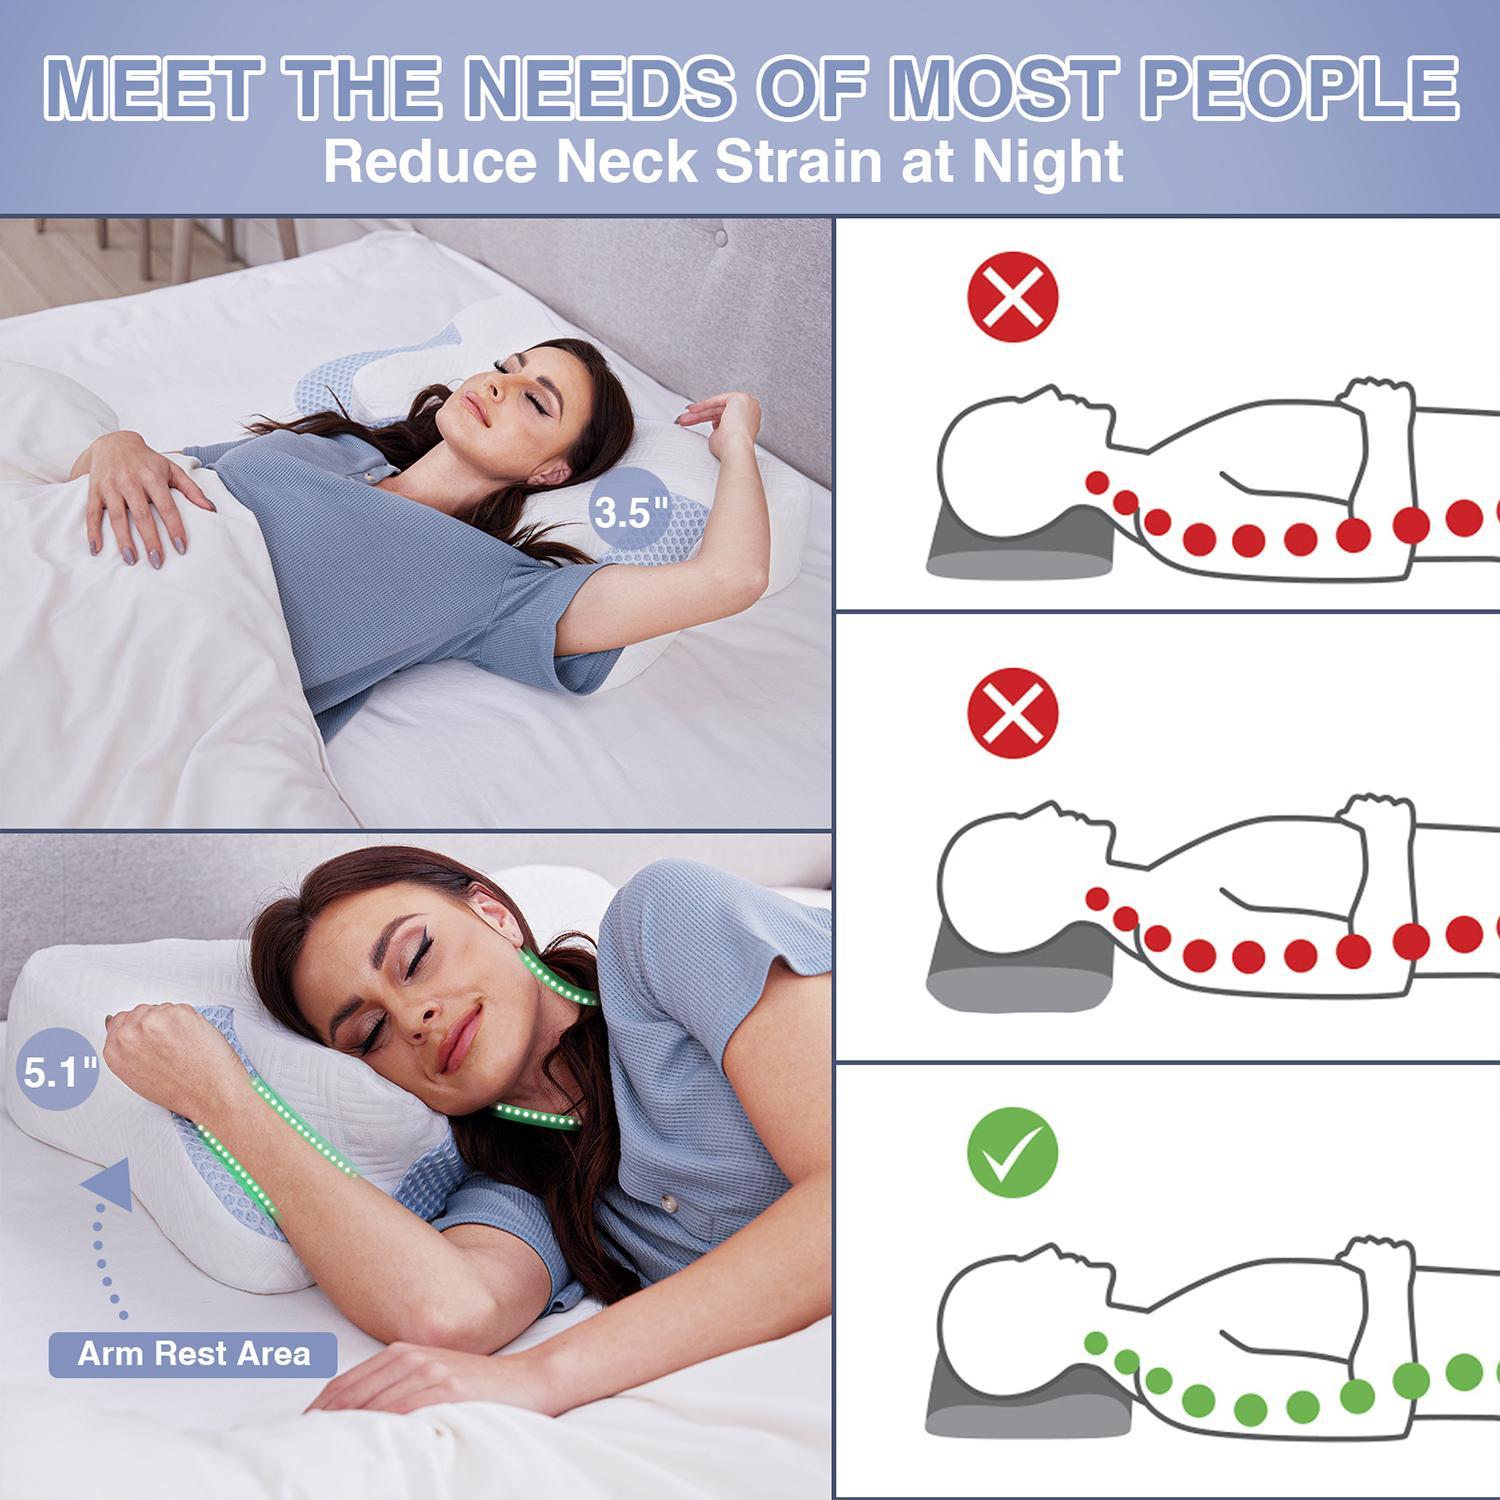 Cervical Memory Foam Pillows, Contour Pillow for Neck and Shoulder Pain Relief, Neck Support Pillow for Side, Back and Stomach Sleepers, Ergonomic Orthopedic Pillow for Sleeping and Travel